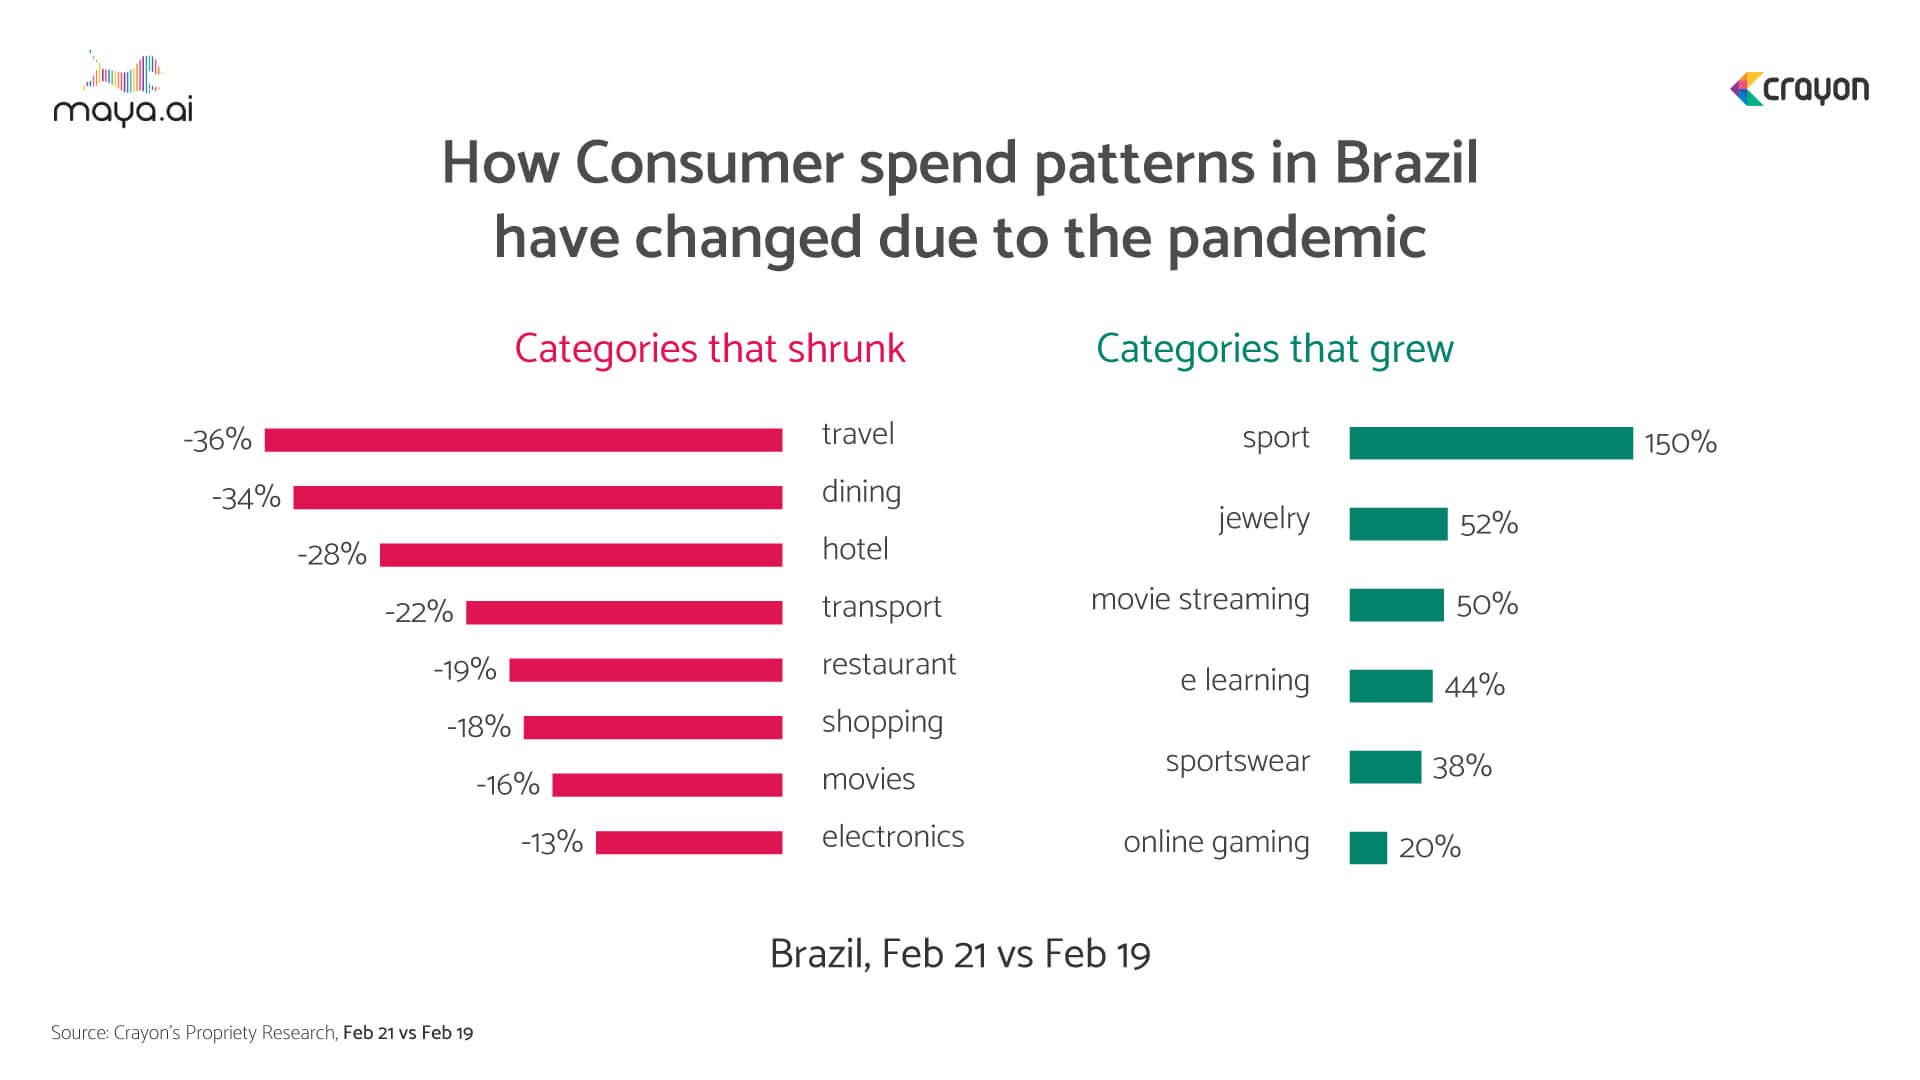 Spend patterns during the pandemic